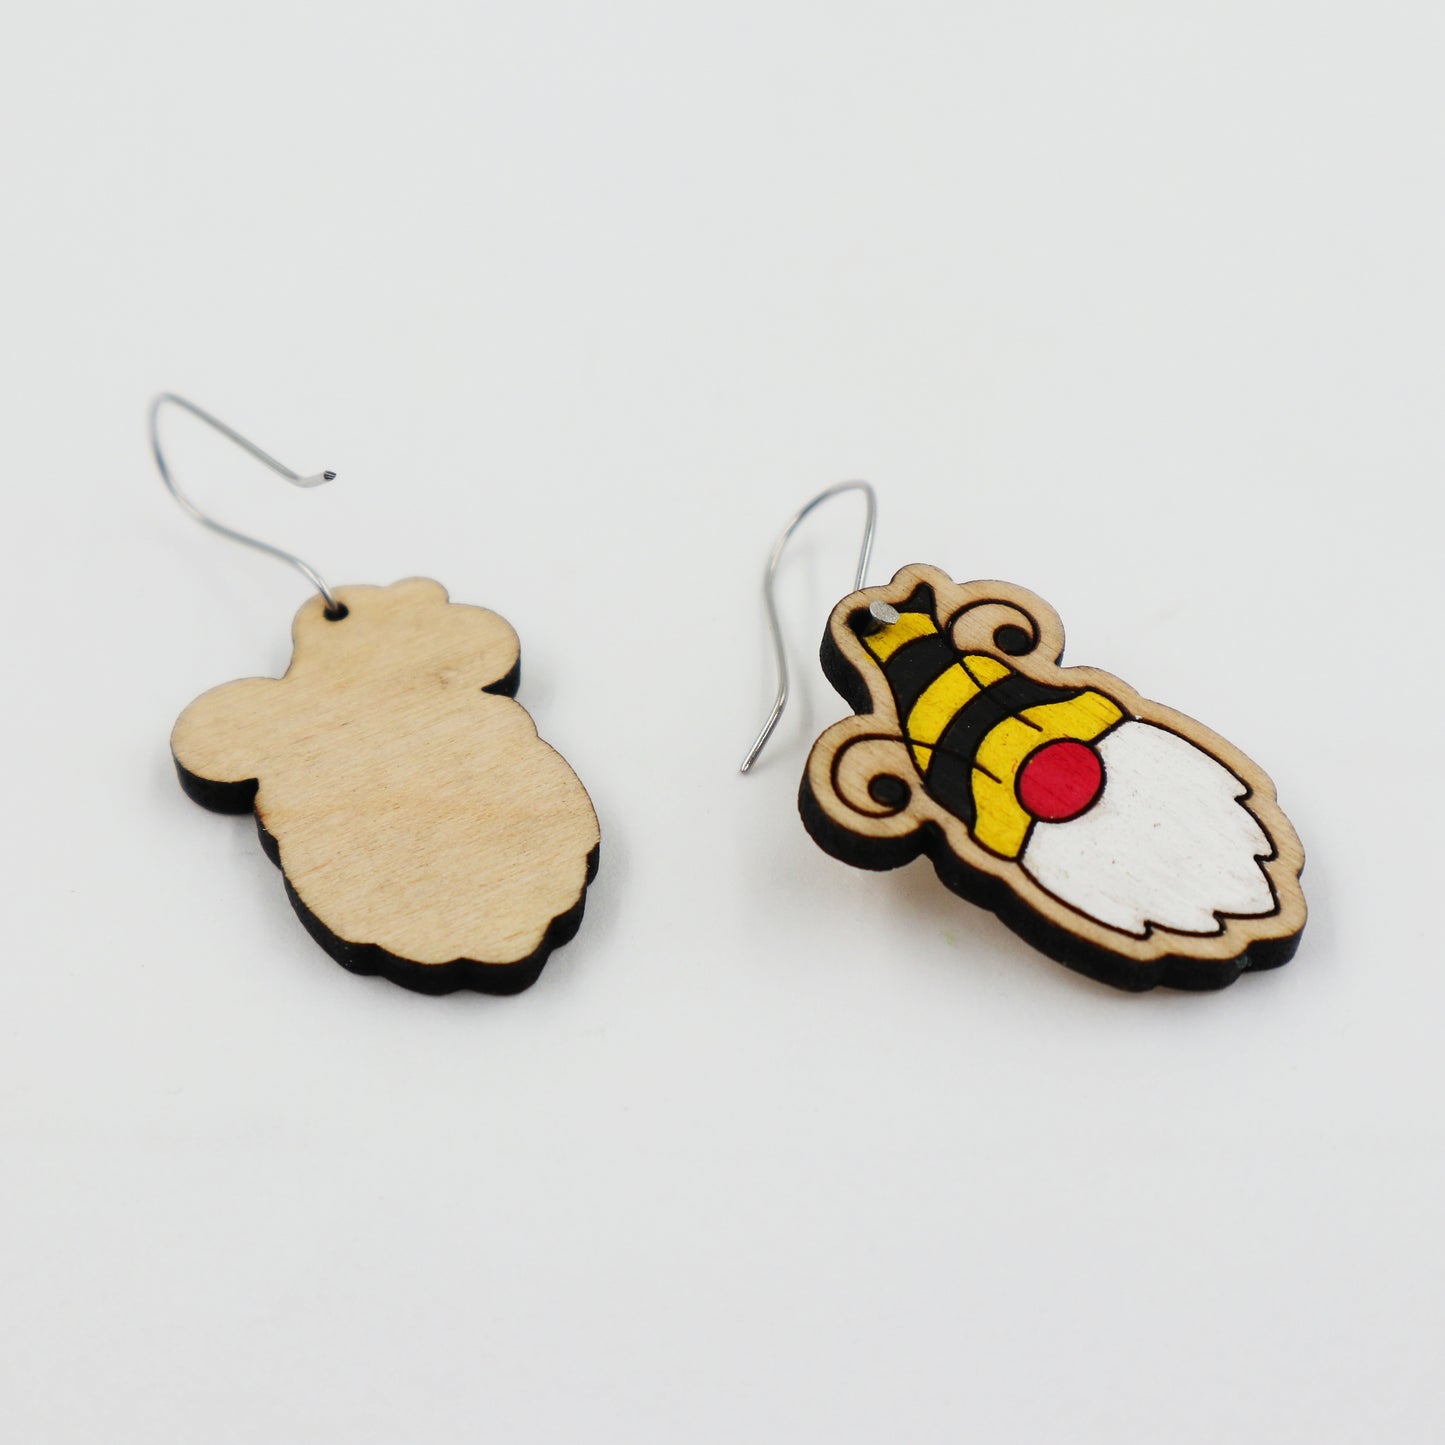 Wooden bumble bee gnome earrings